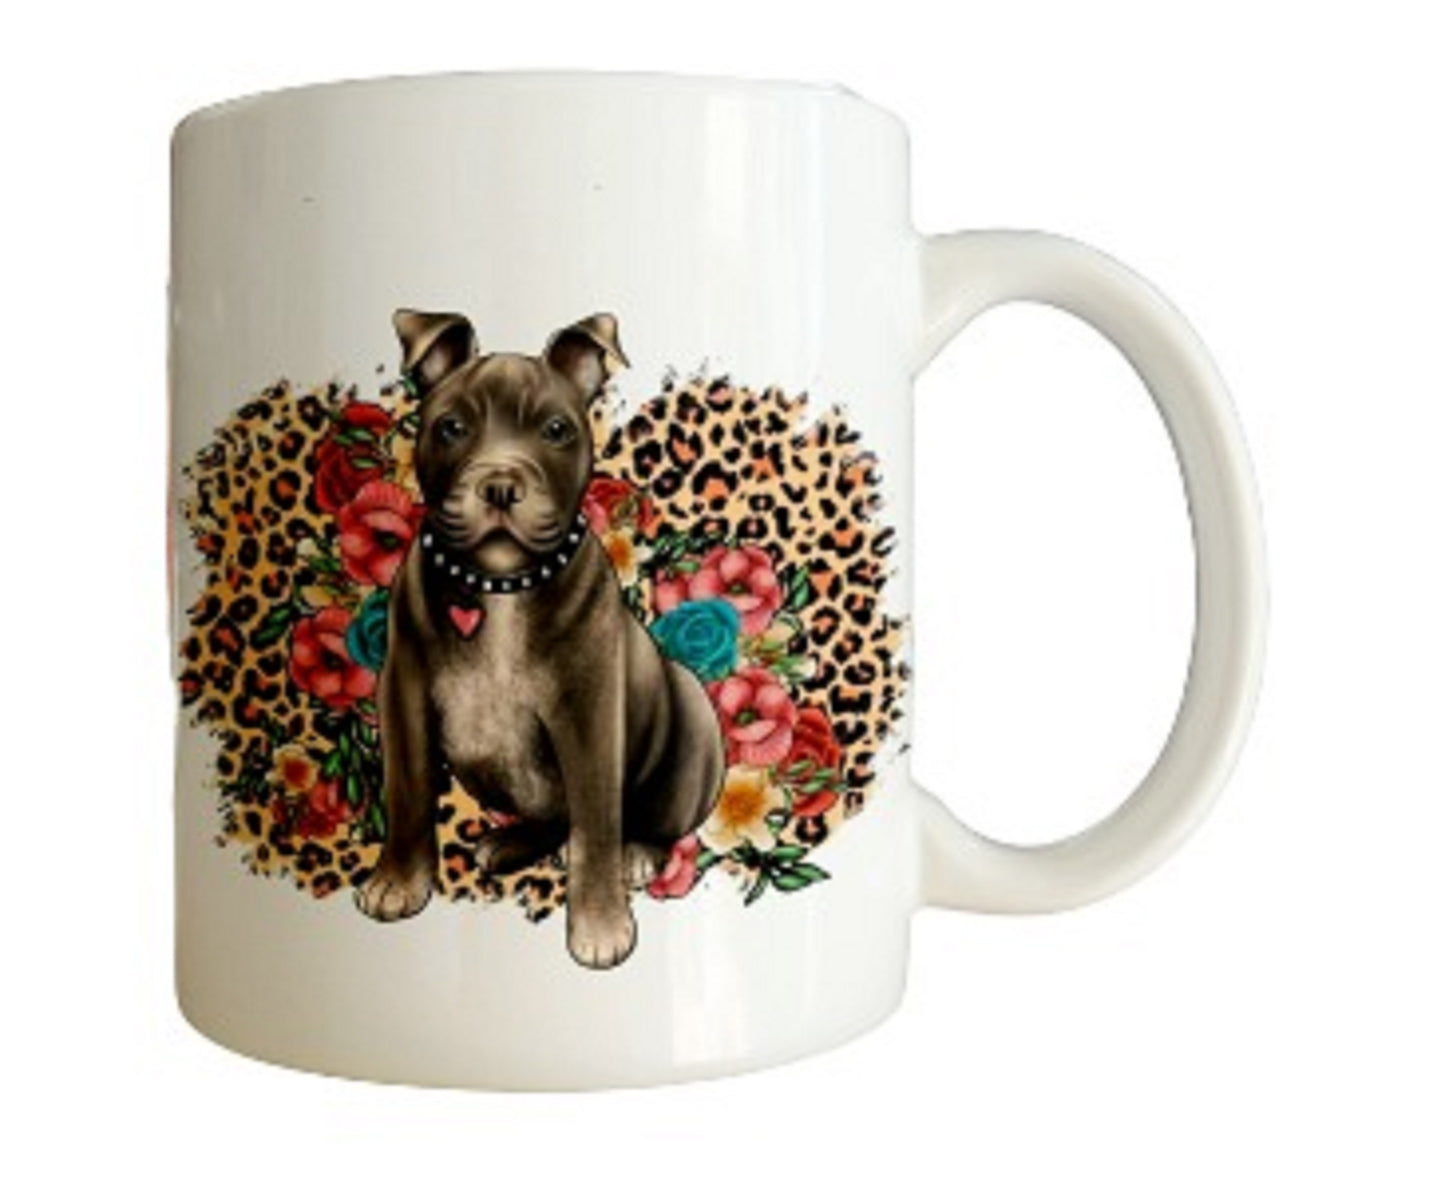  Beautiful Staffordshire Bull Terrier Dog Mug by Free Spirit Accessories sold by Free Spirit Accessories